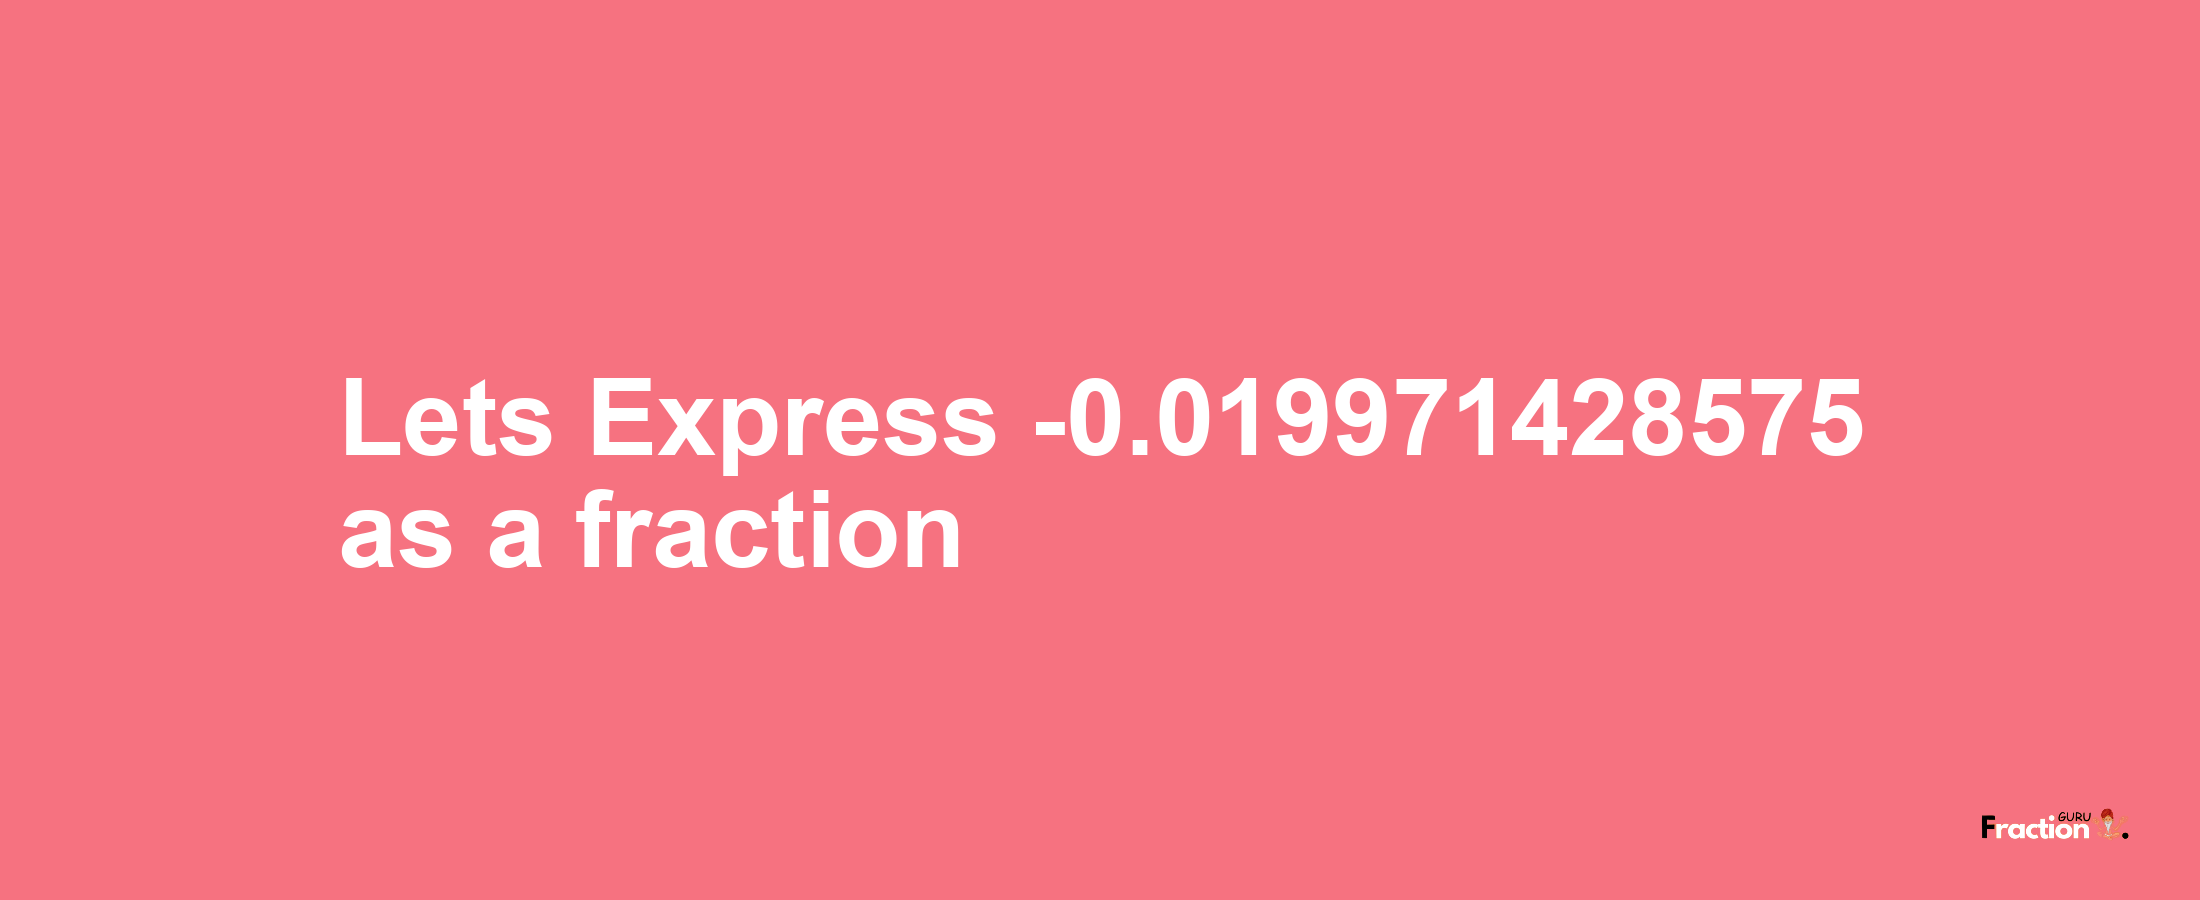 Lets Express -0.019971428575 as afraction